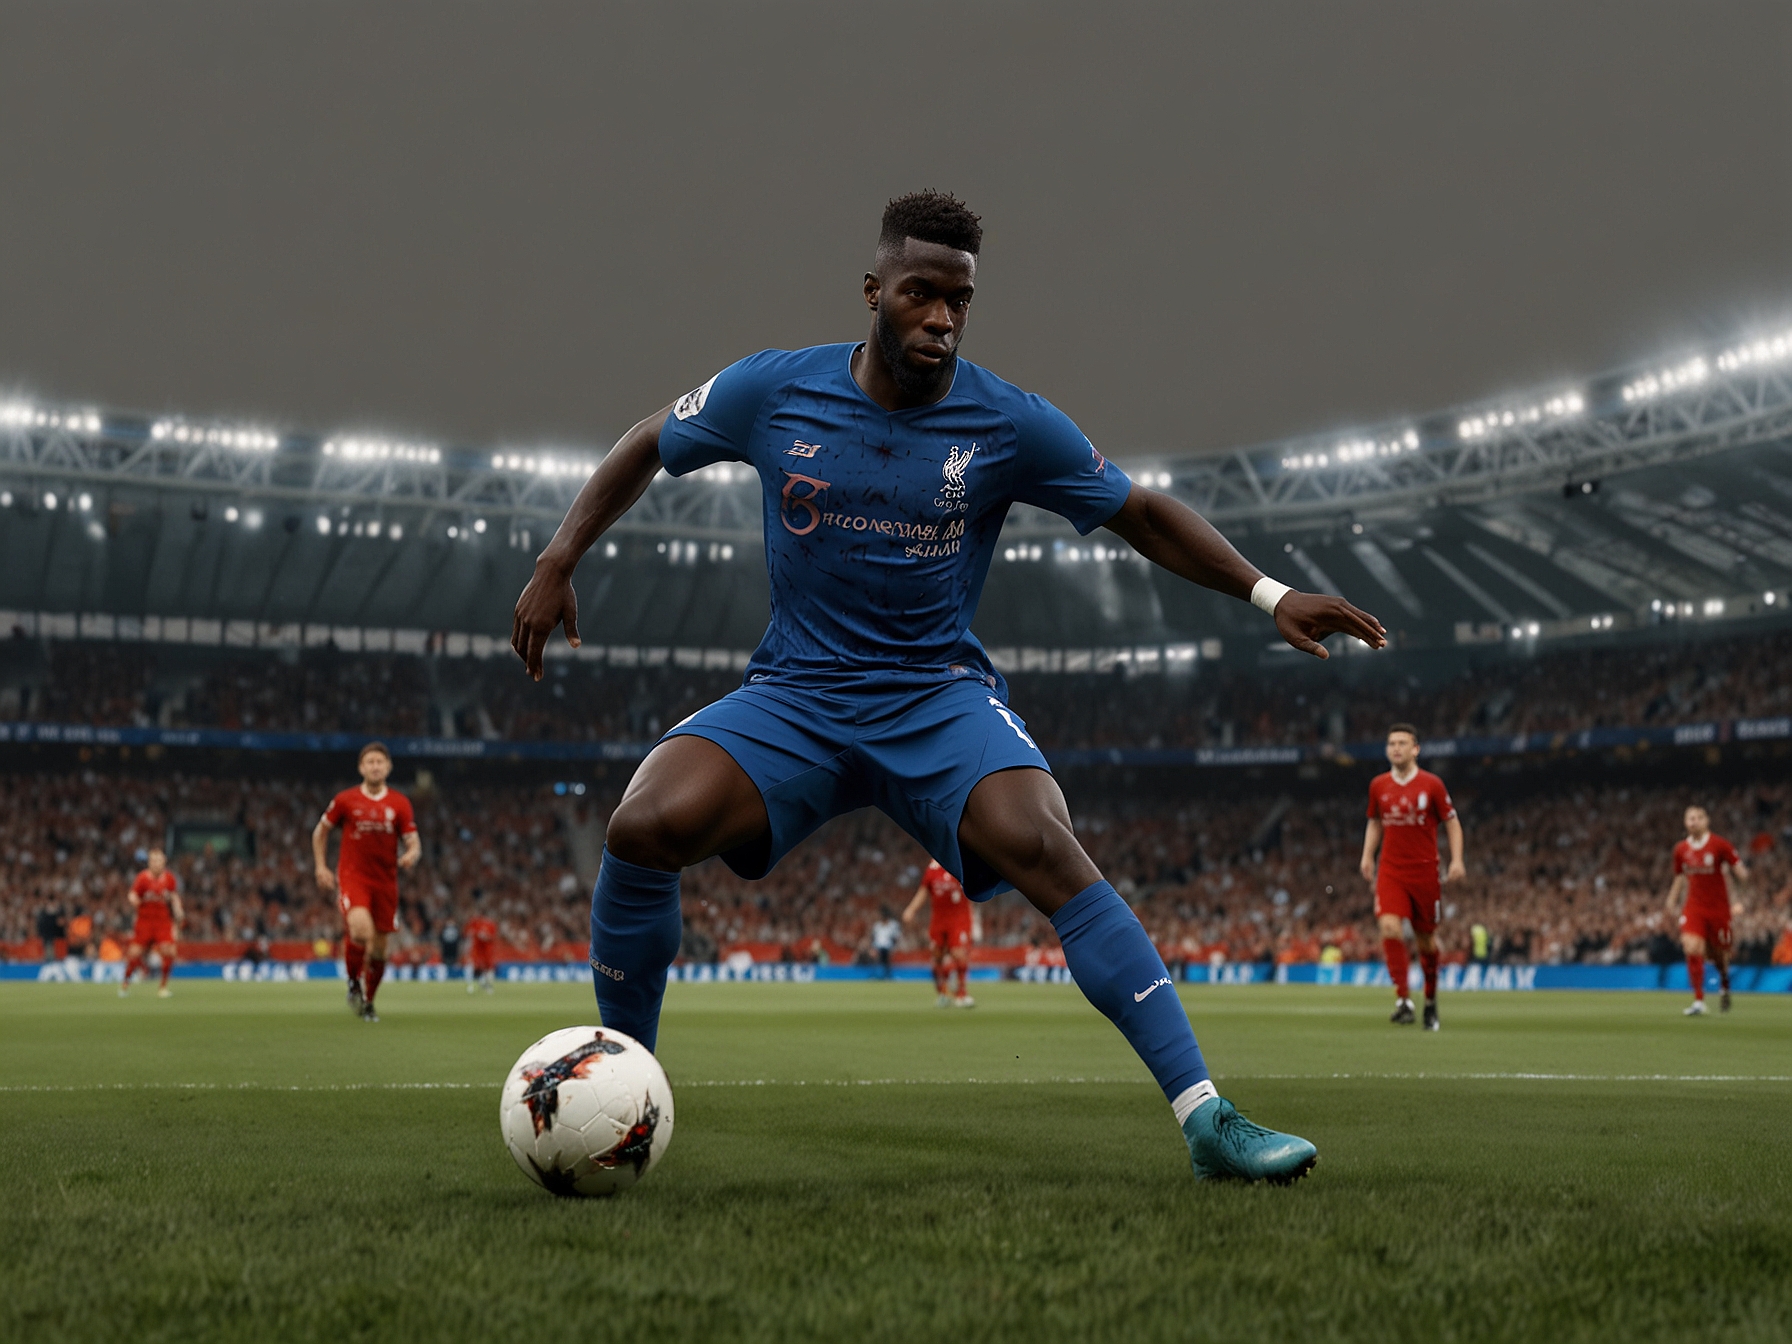 Johan Bakayoko dazzles on the pitch at Euro 2024, demonstrating his speed and dribbling ability, as Liverpool scouts keenly observe, weighing a potential transfer to Merseyside.